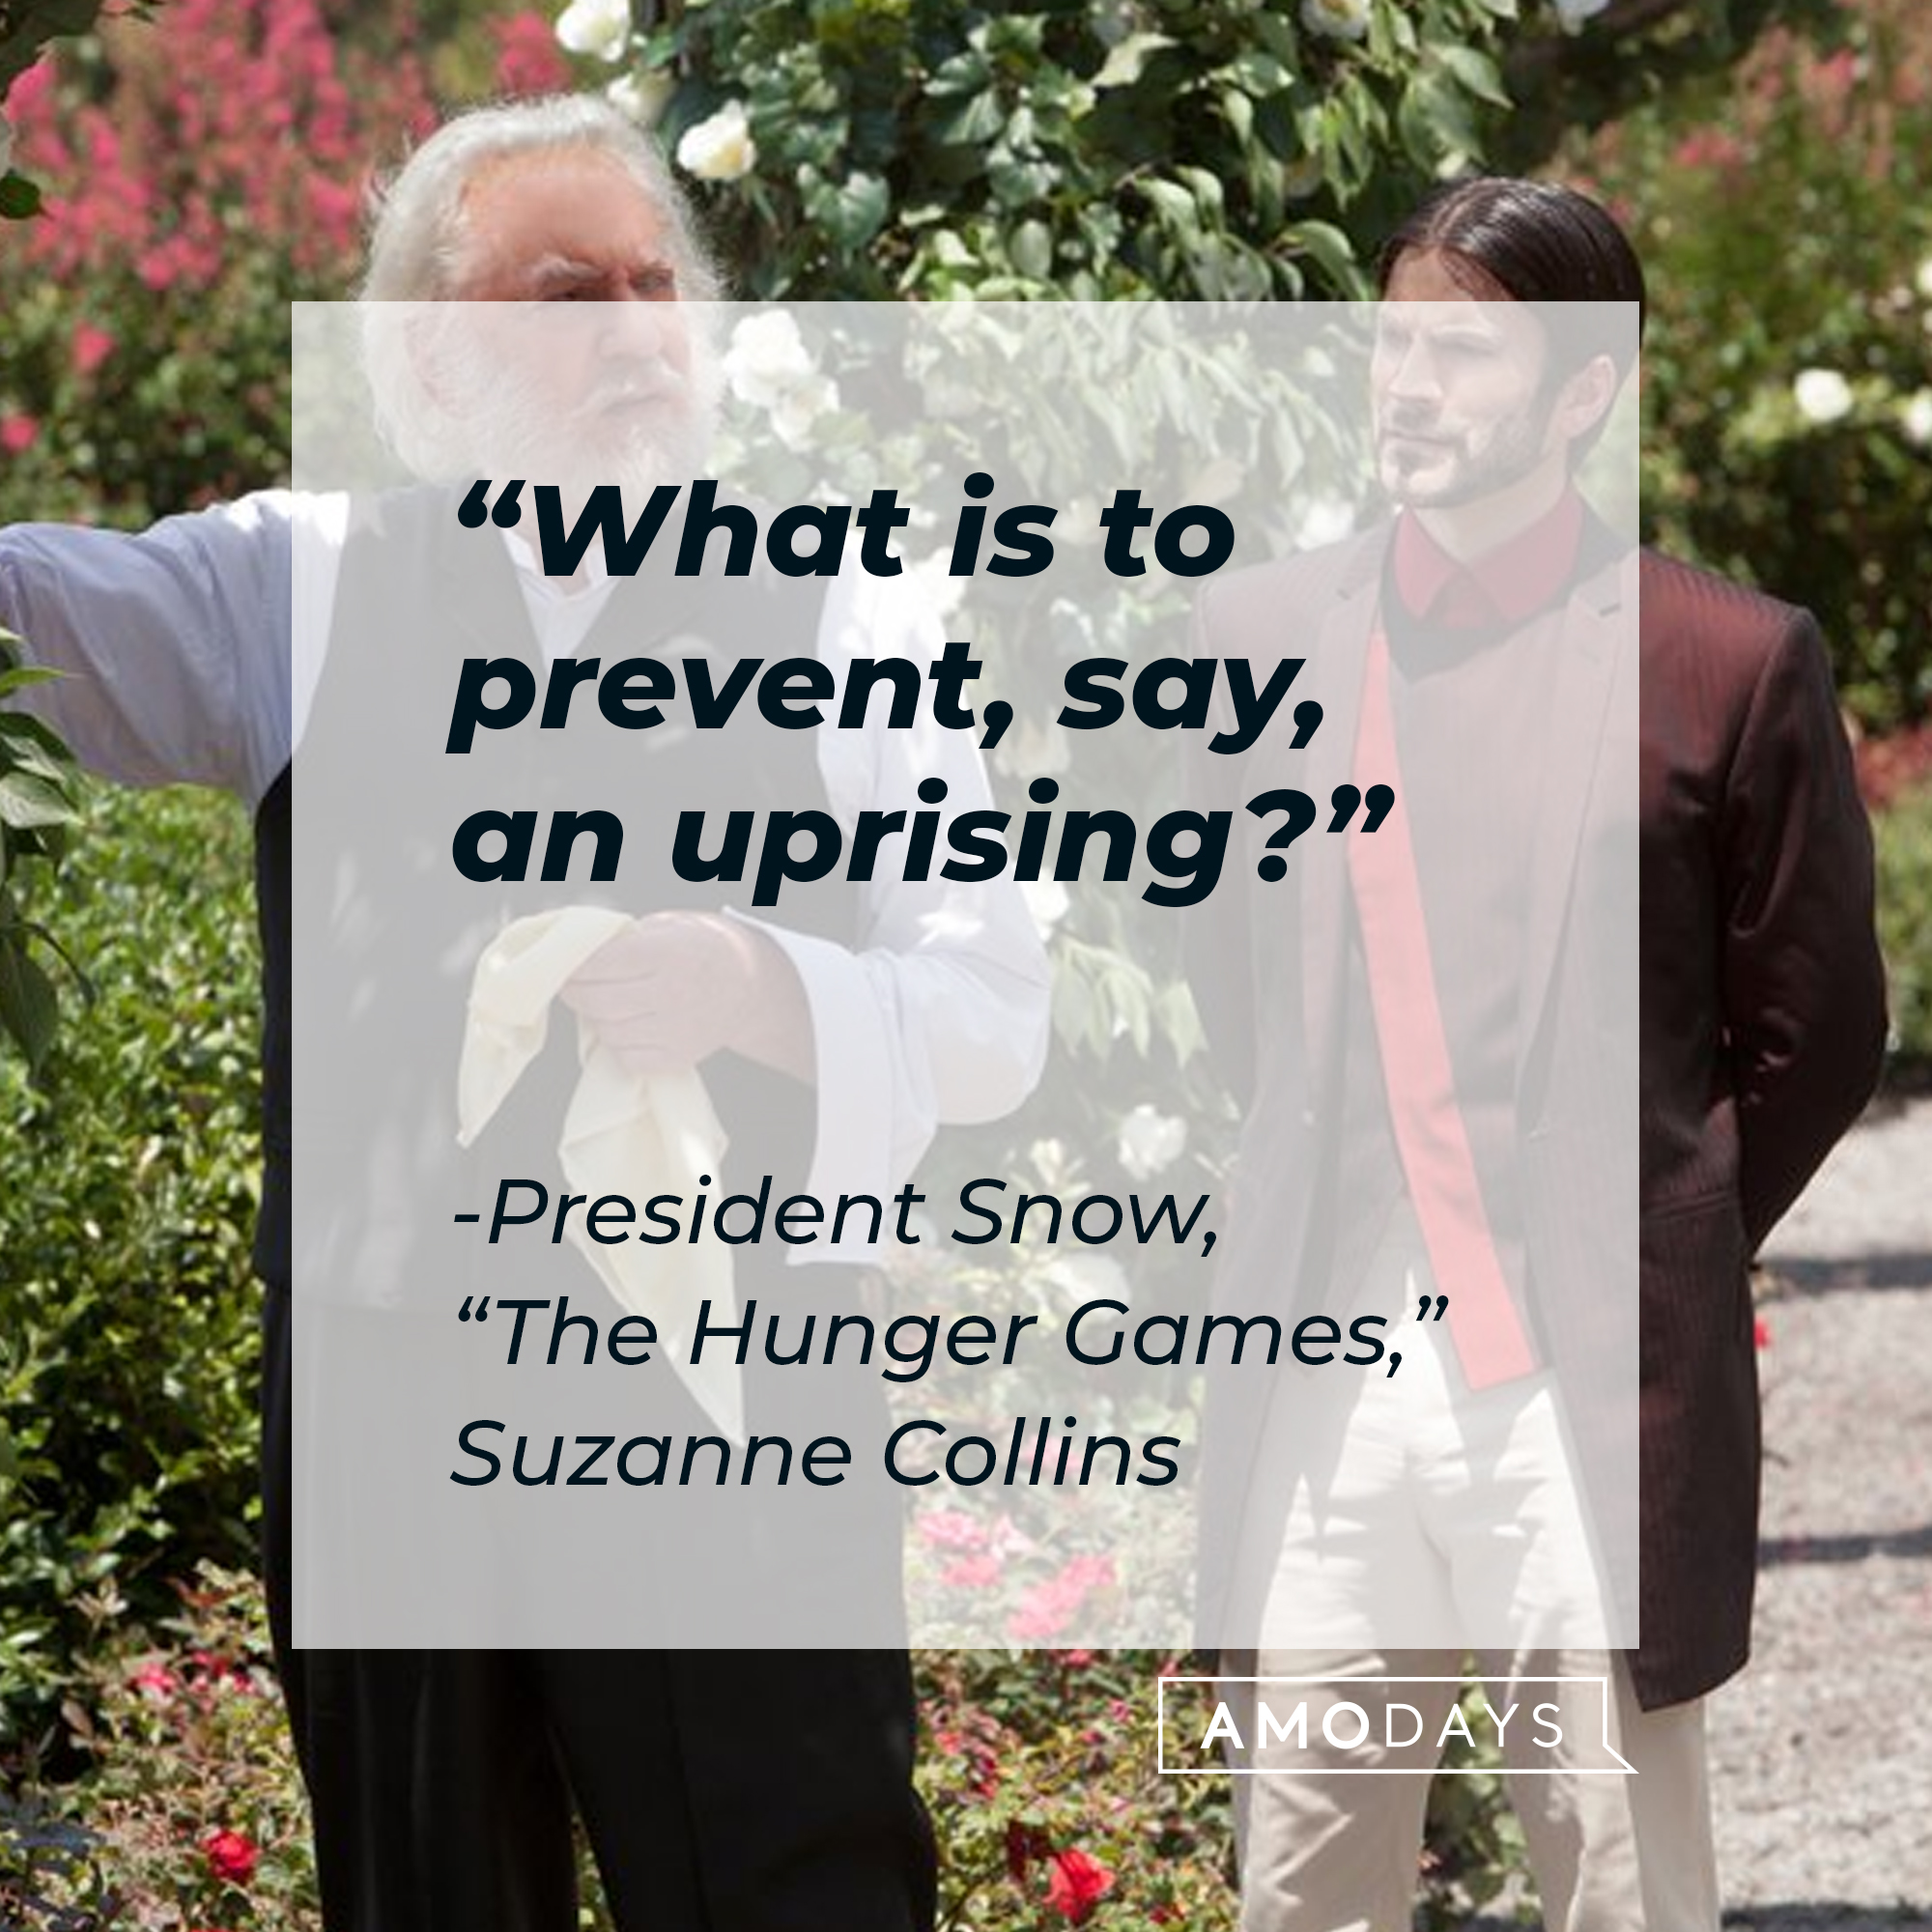 President Snow with Seneca Crane, with Snow’s quote from Suzanne Collins’ “Hunger Games”:  “What is to prevent, say, an uprising?” | Source: facebook.com/TheHungerGamesMovie